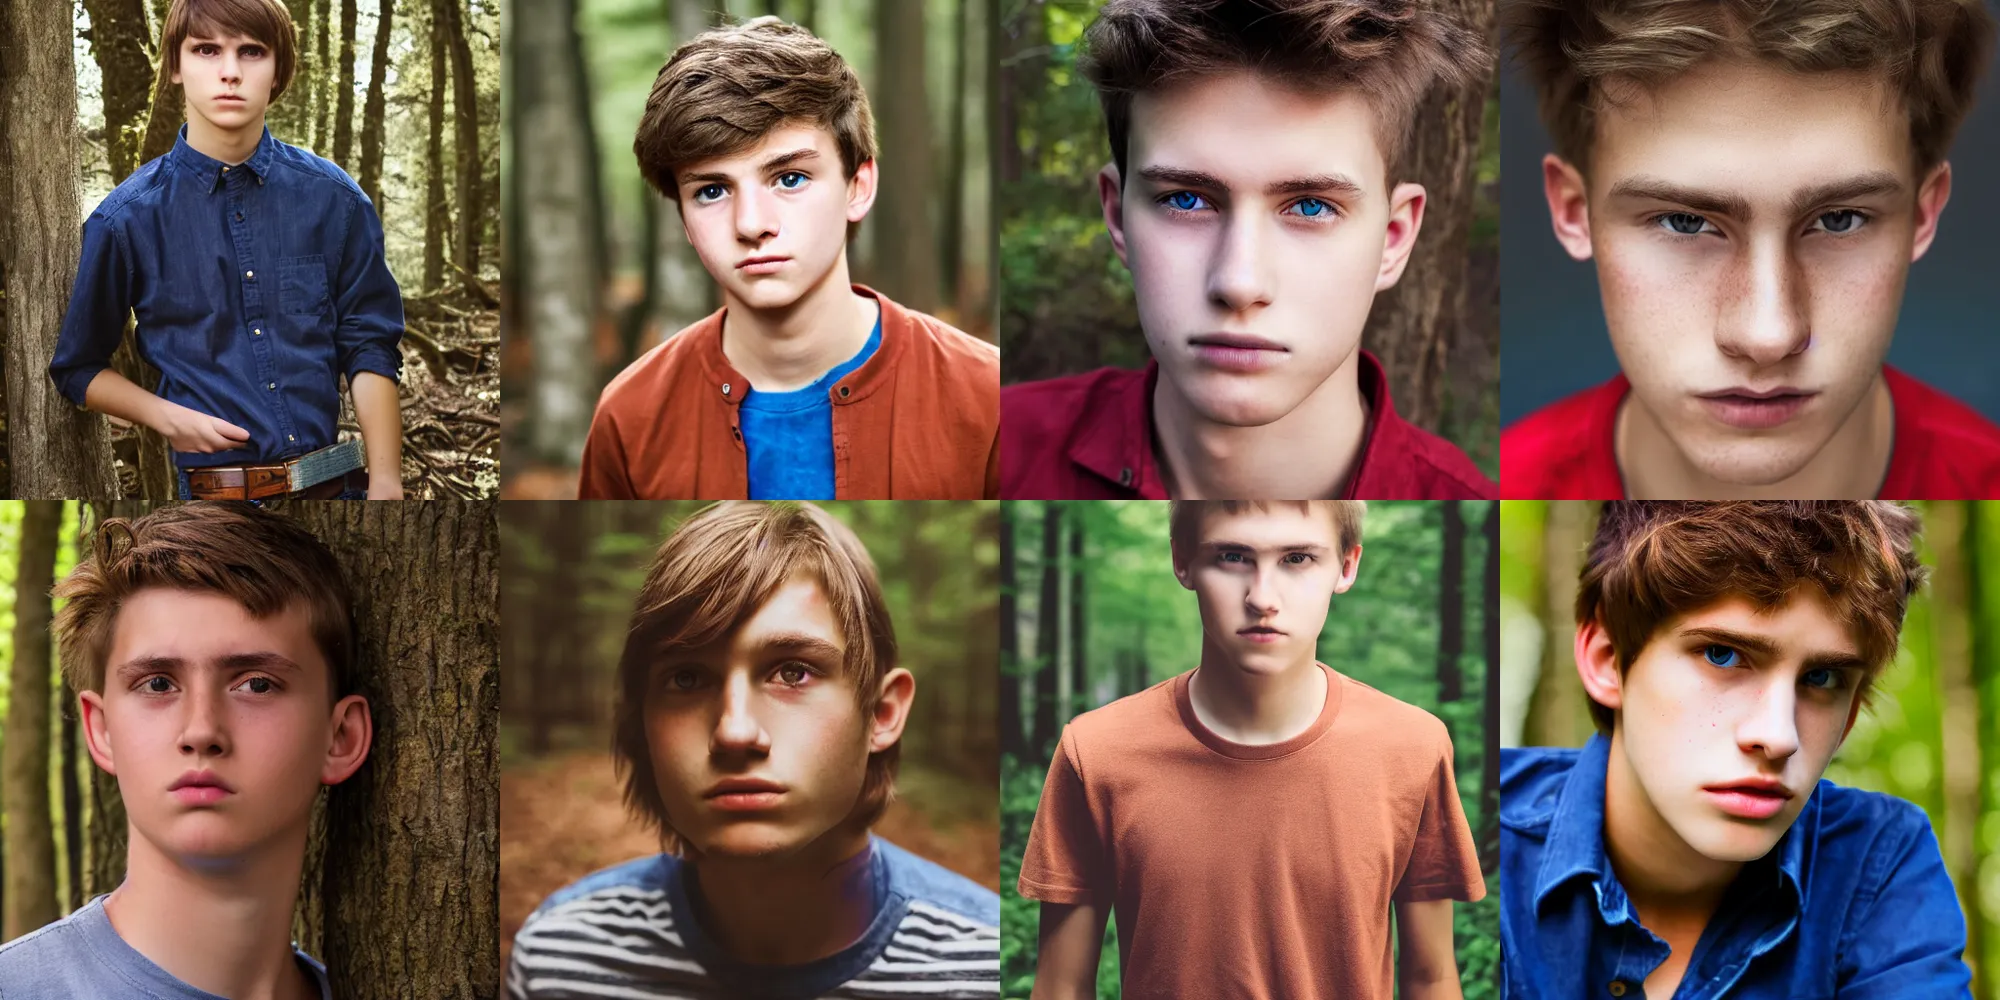 Prompt: portrait, male teenager, brown hair, red shirt, blue jeans, dark shaped eyes, walking in forest, detailed face, realistic photo.